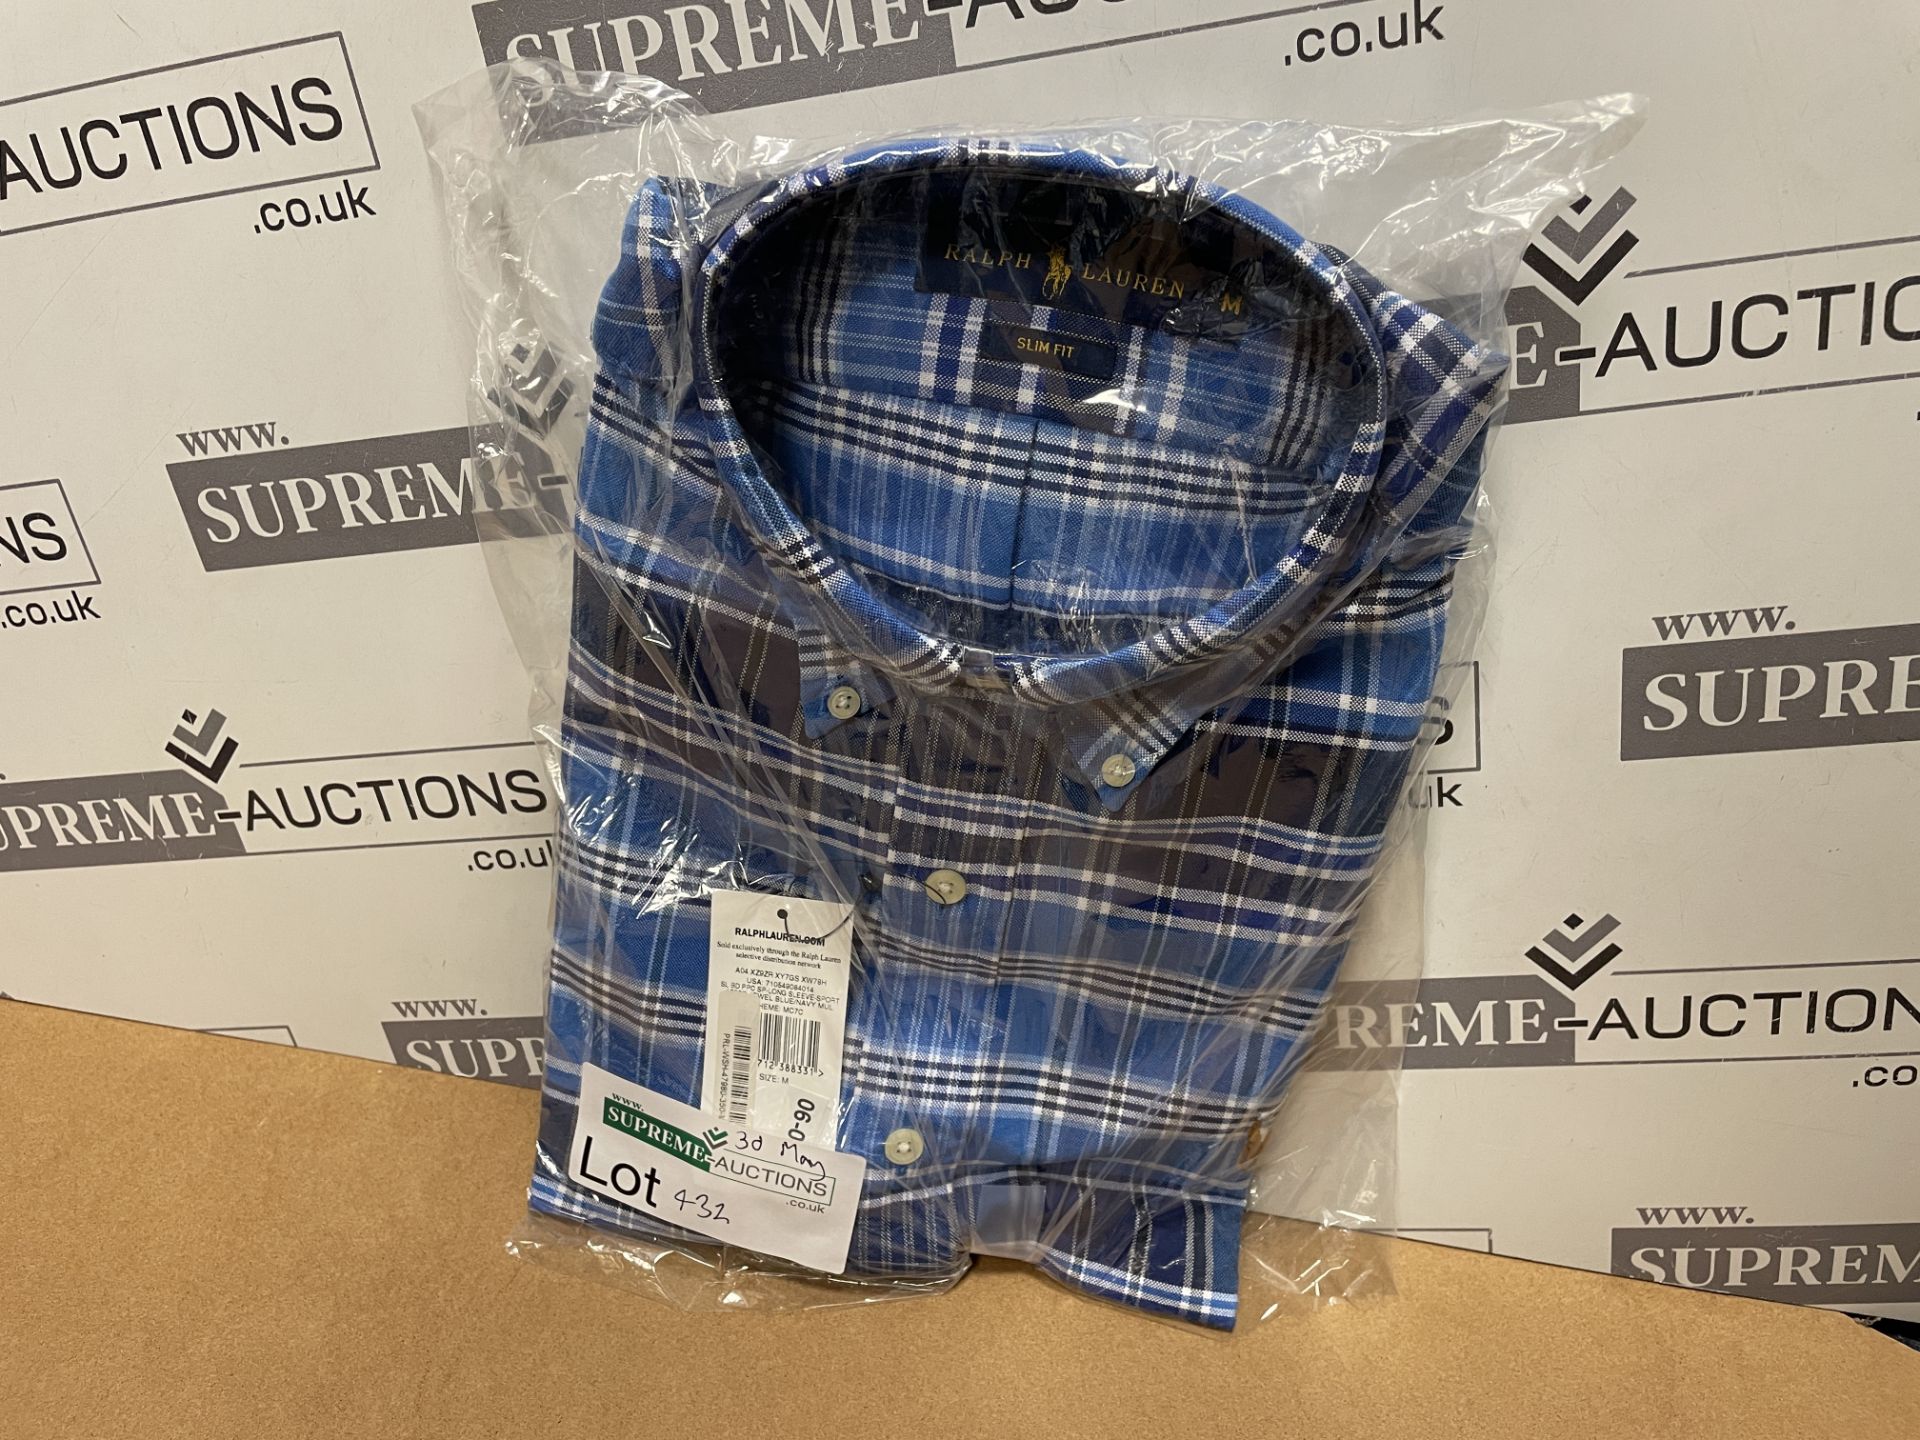 BRAND NEW WITH TAGS RALPH LAUREN Mens Slim Fit Long Sleeve Checked Shirt BLUE/NAVY, SIZE (M). RRP £